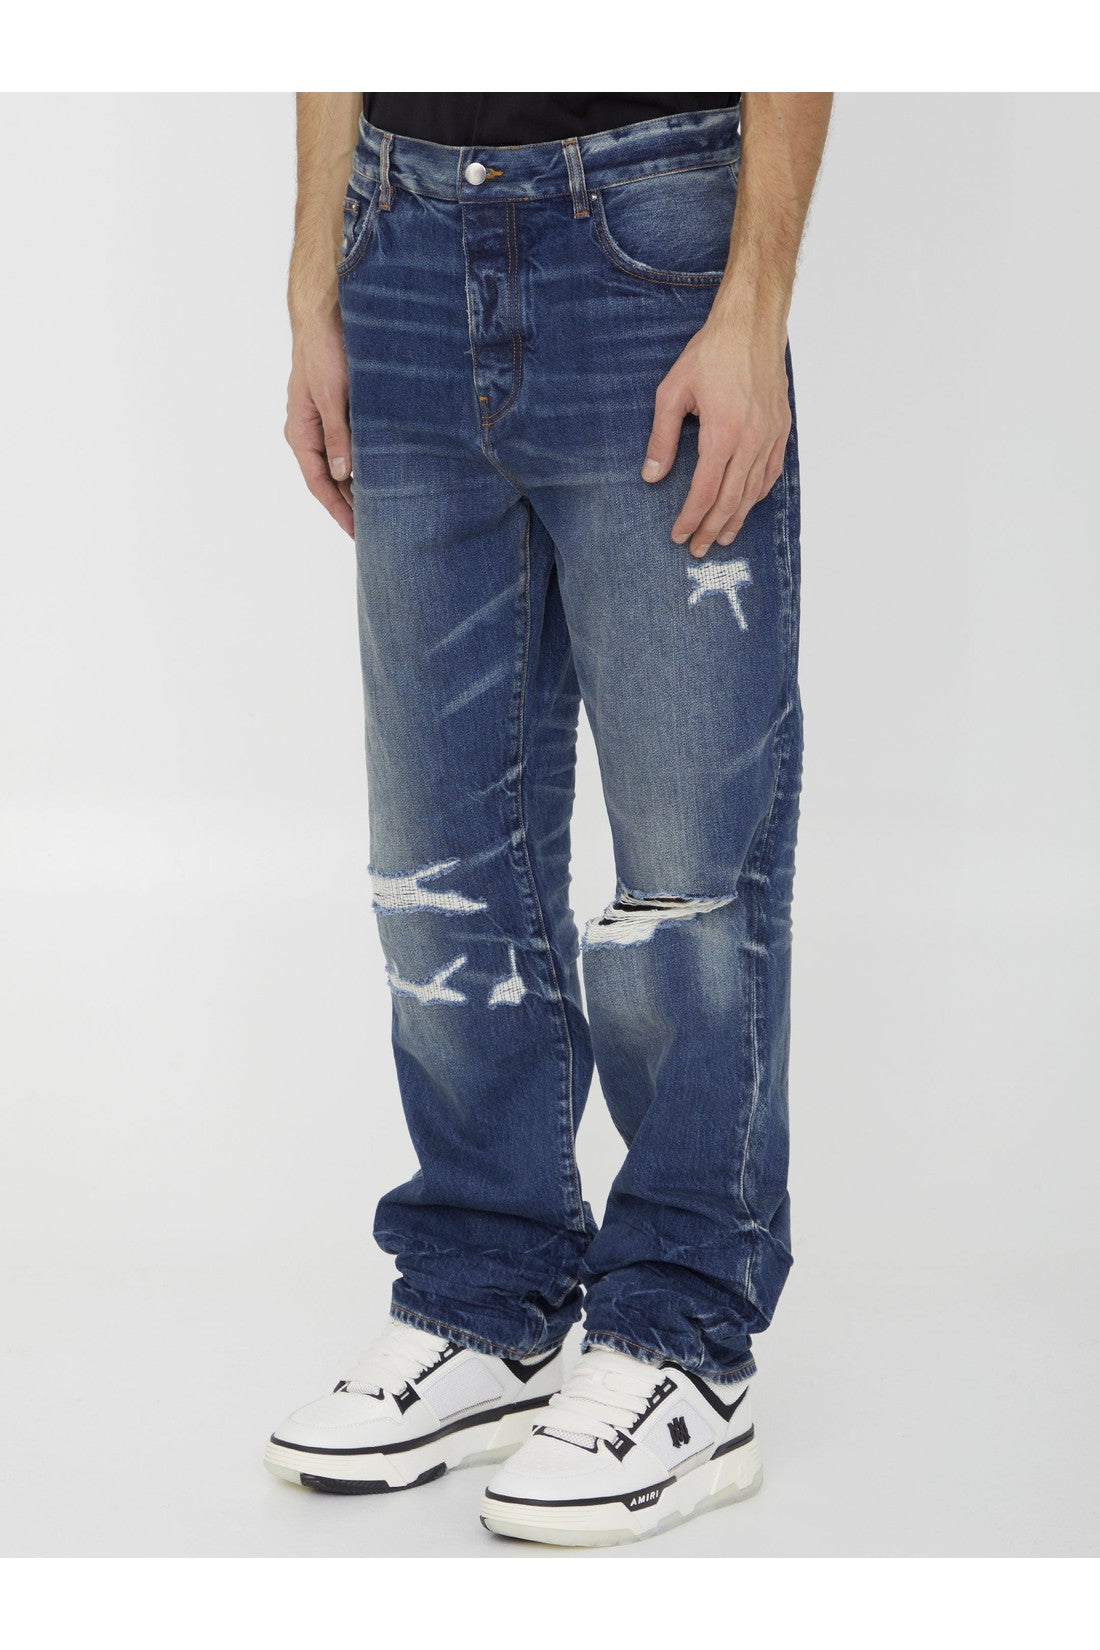 Fractured Straight jeans